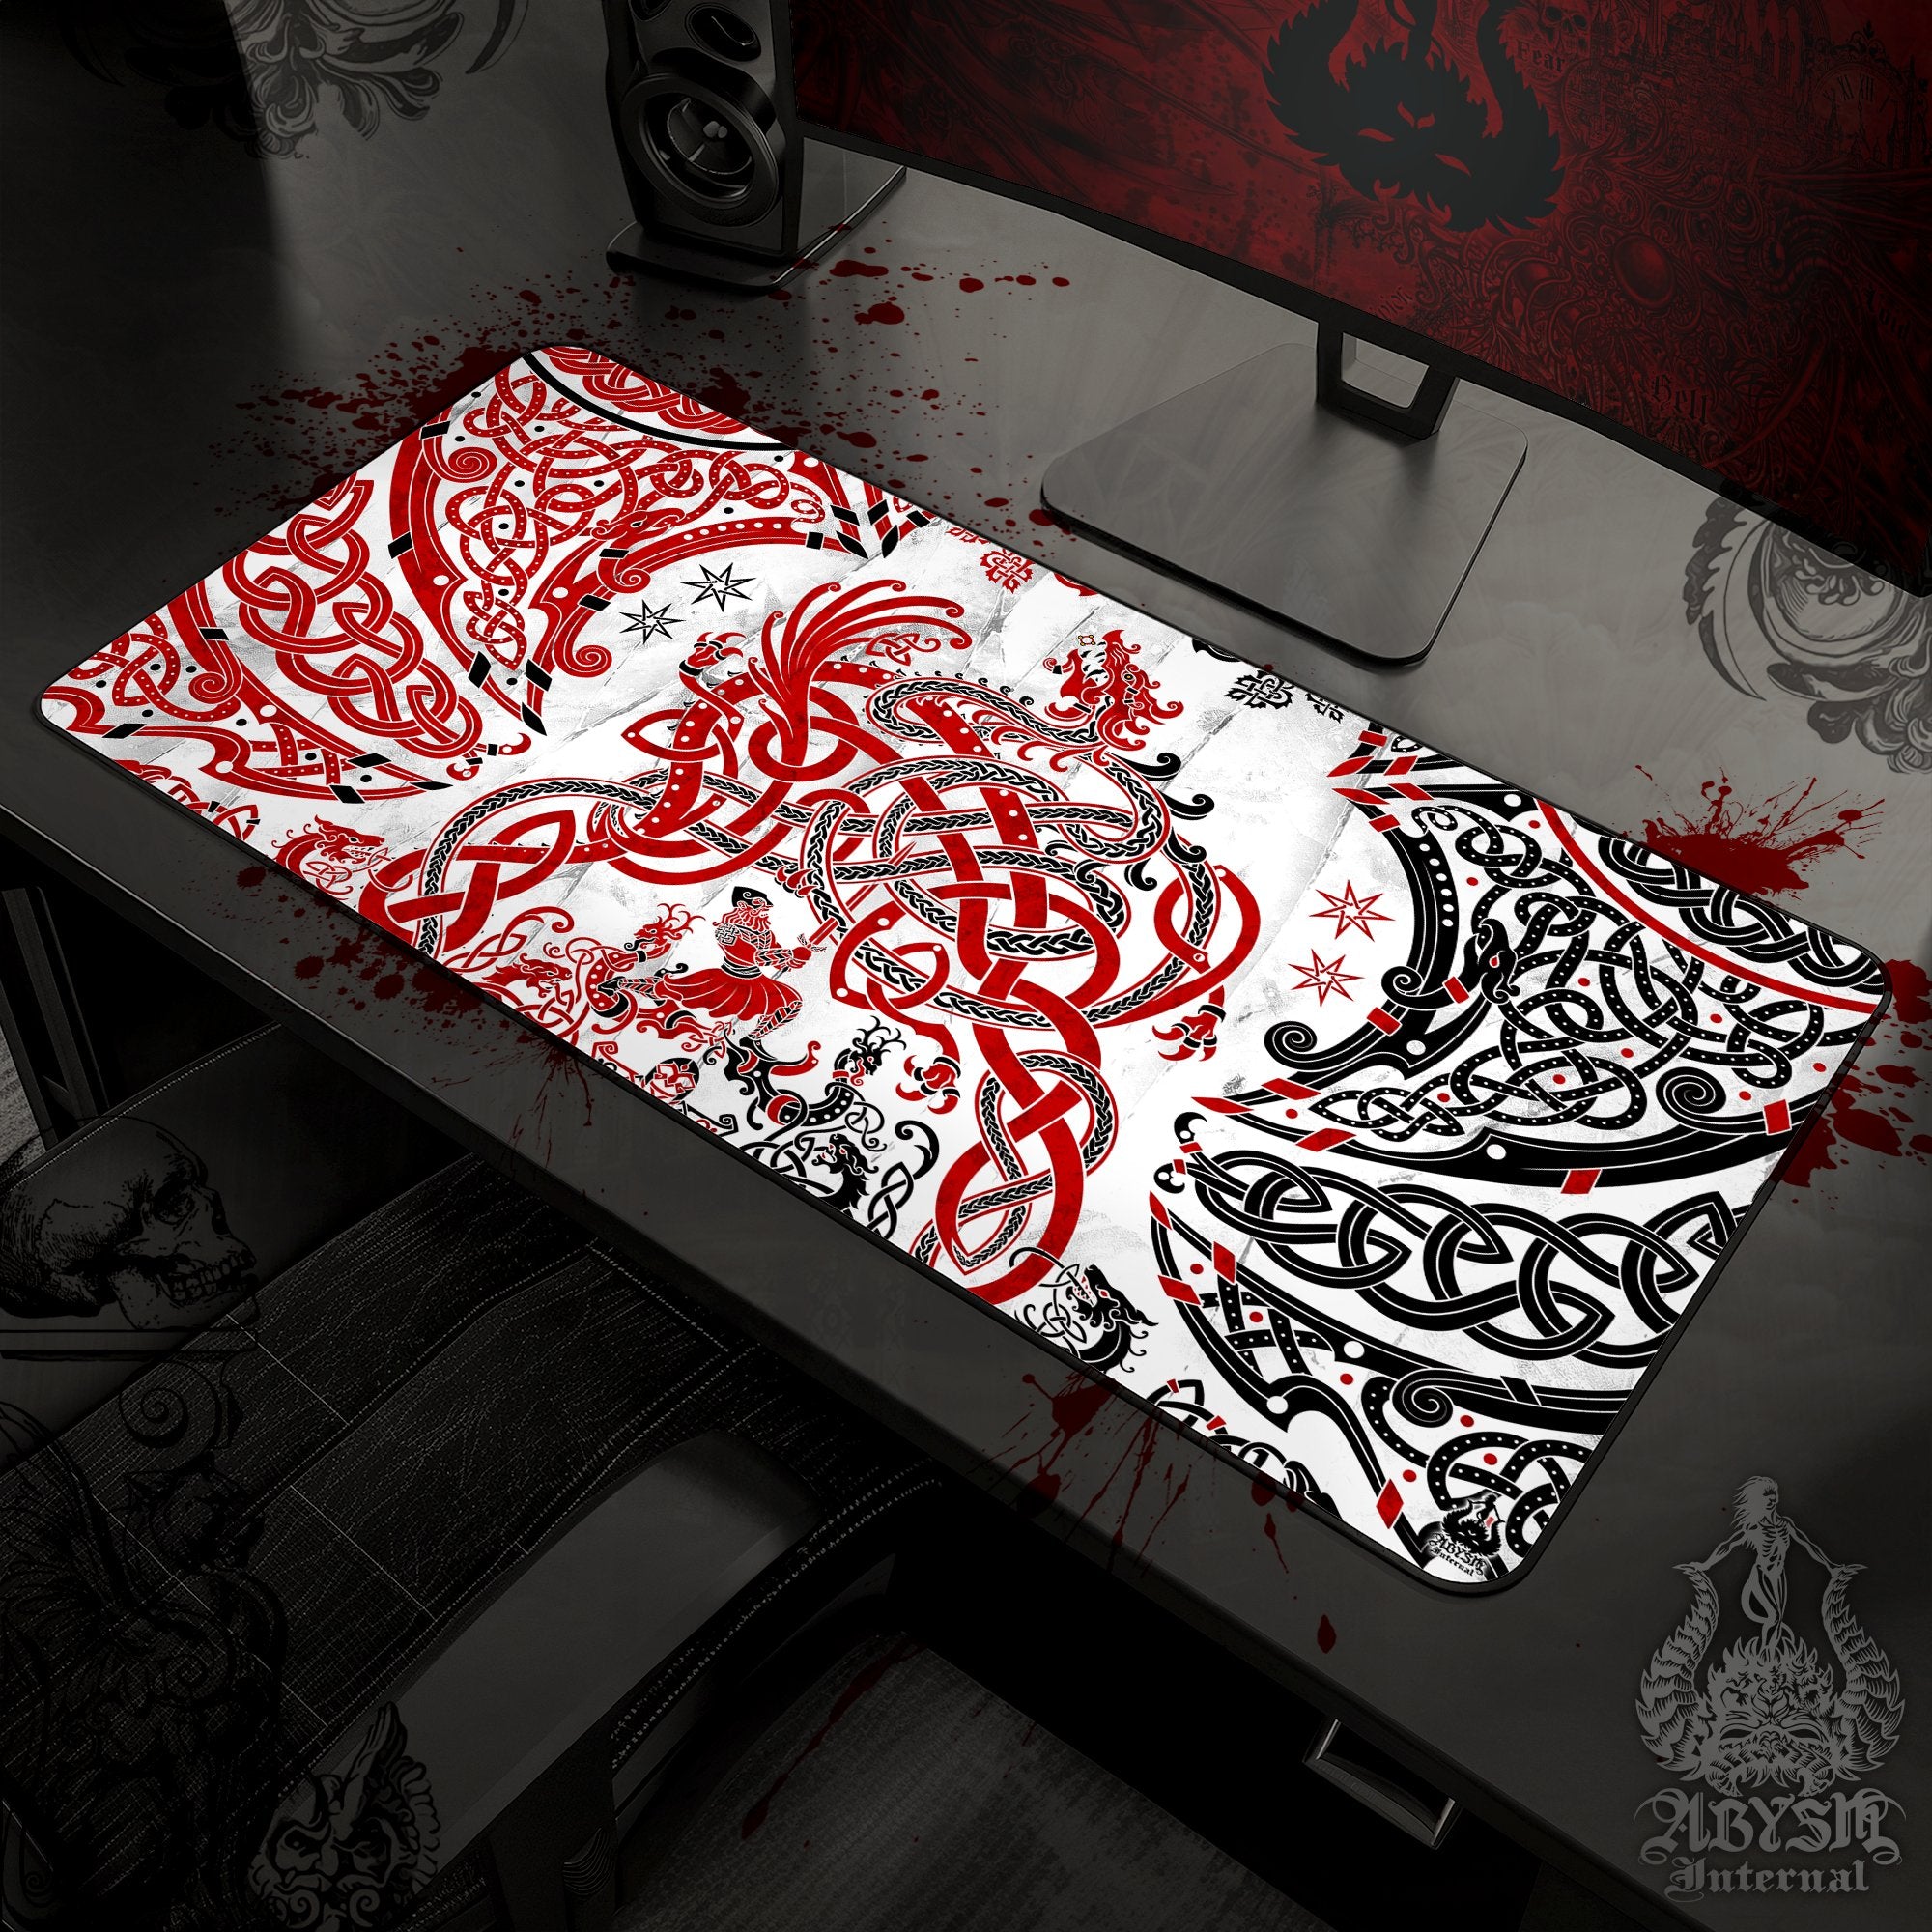 Nordic Dragon Desk Mat, Viking Gaming Mouse Pad, Norse Knotwork Table Protector Cover, Fafnir Workpad, Art Print - Red White Black - Abysm Internal